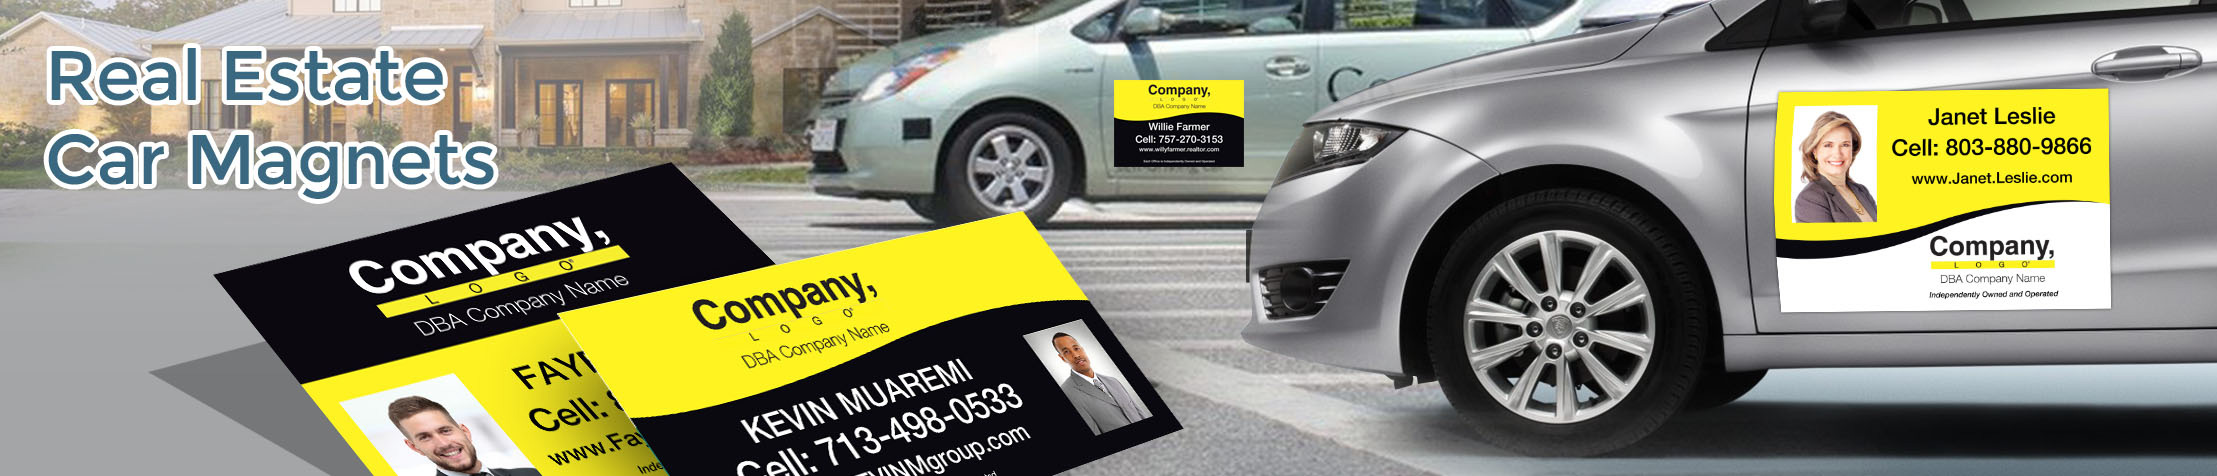 Weichert Real Estate Car Magnets - Weichert  custom car magnets for realtors, with or without photo | BestPrintBuy.com